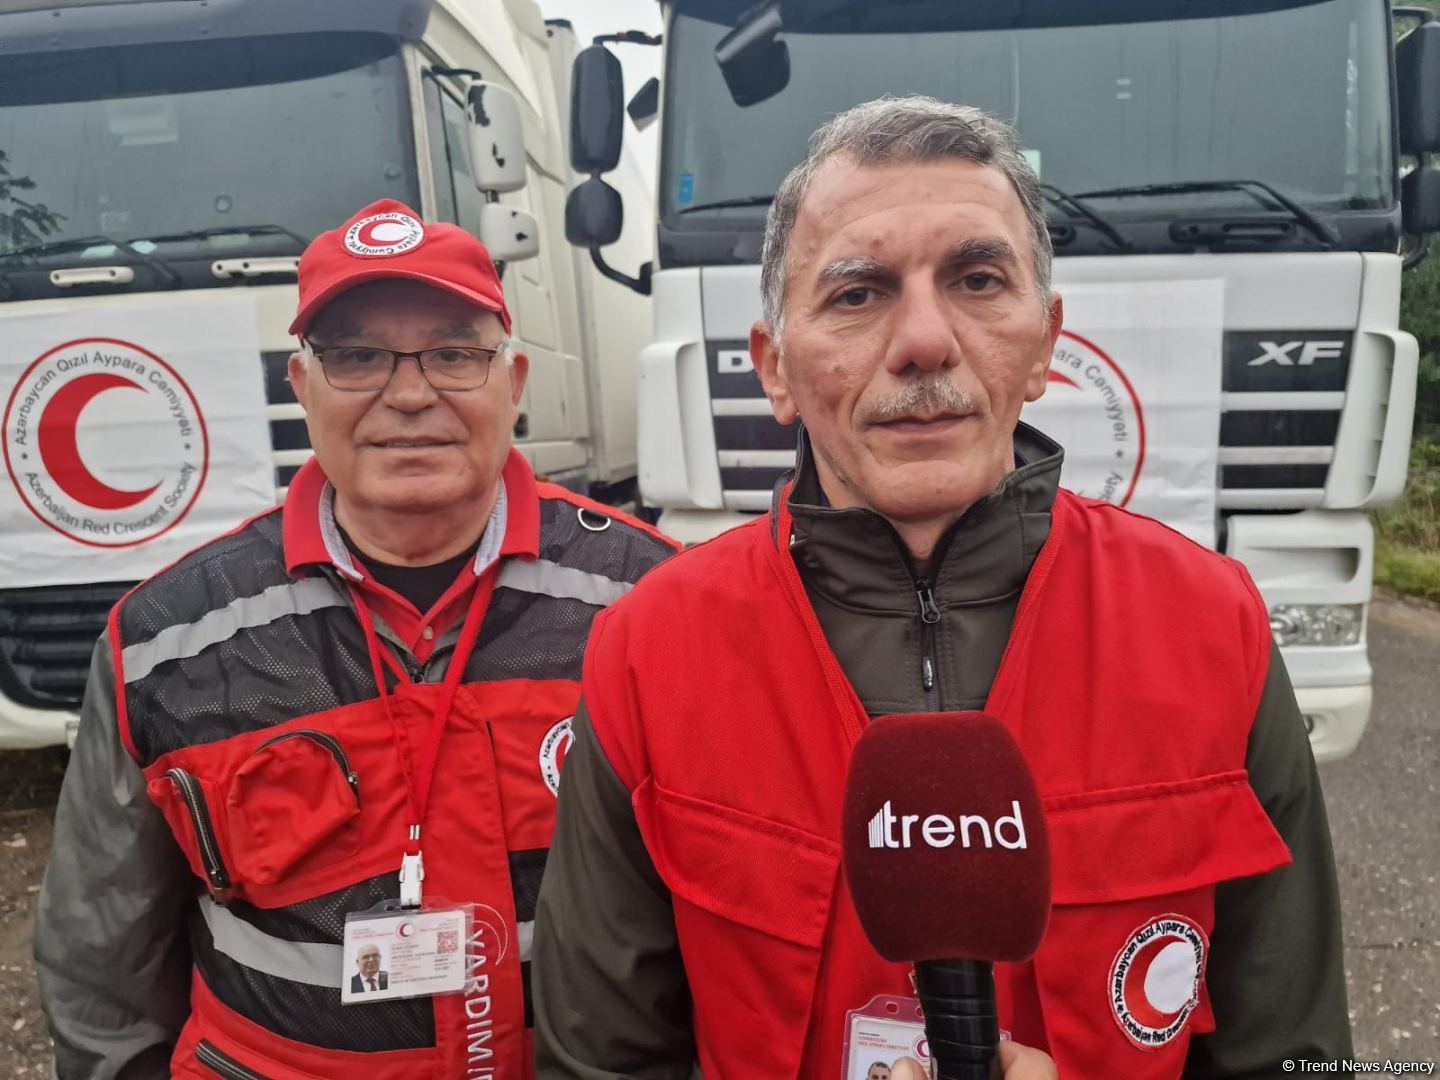 Azerbaijan Red Crescent Society looks to speak with Russian Red Cross team after their return from Khankendi